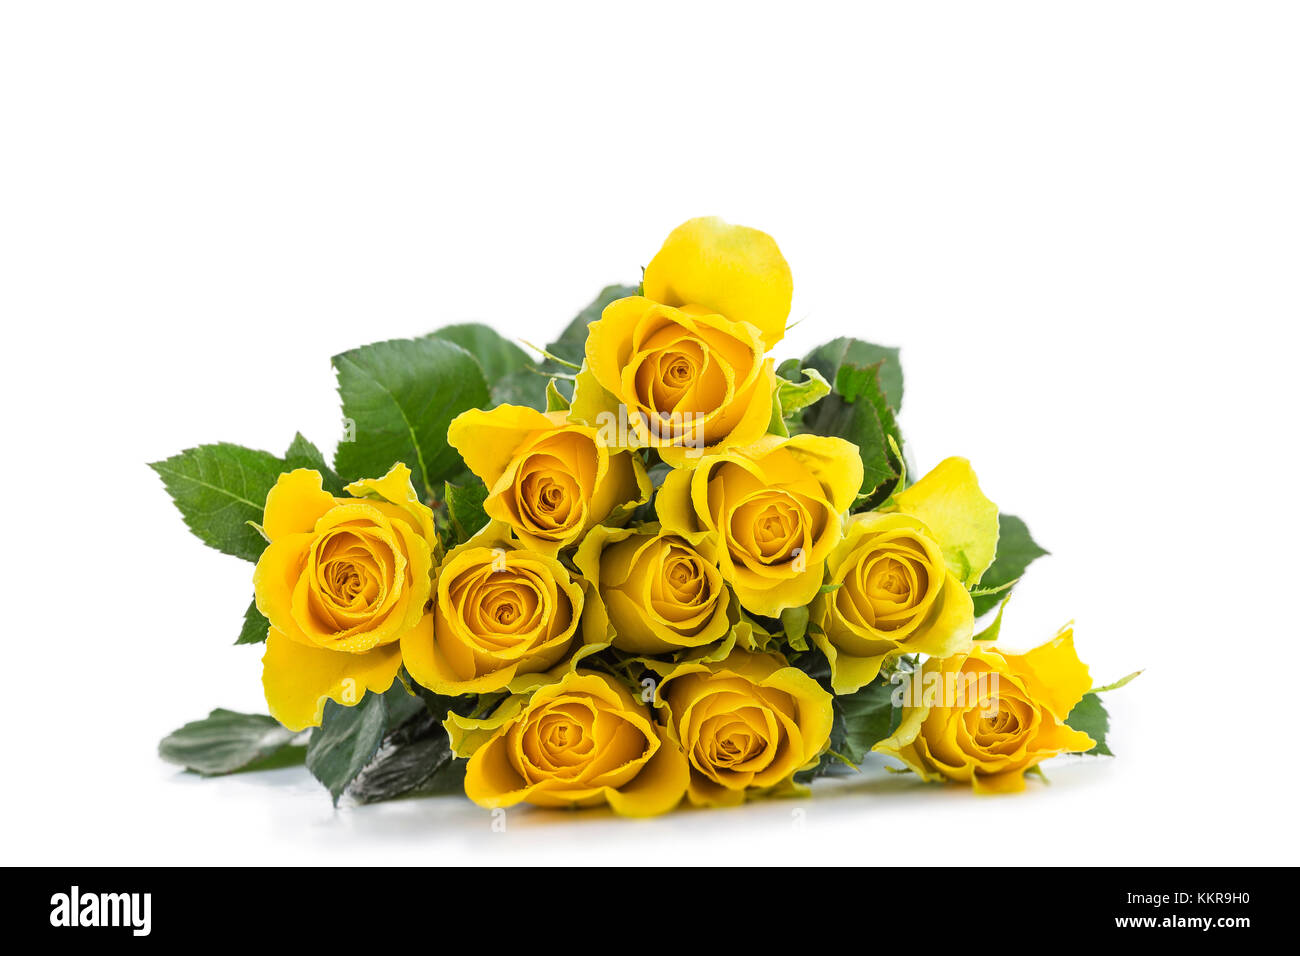 A classic bouquet of yellow roses horizontal, against white backgroundcopy-sace Stock Photo